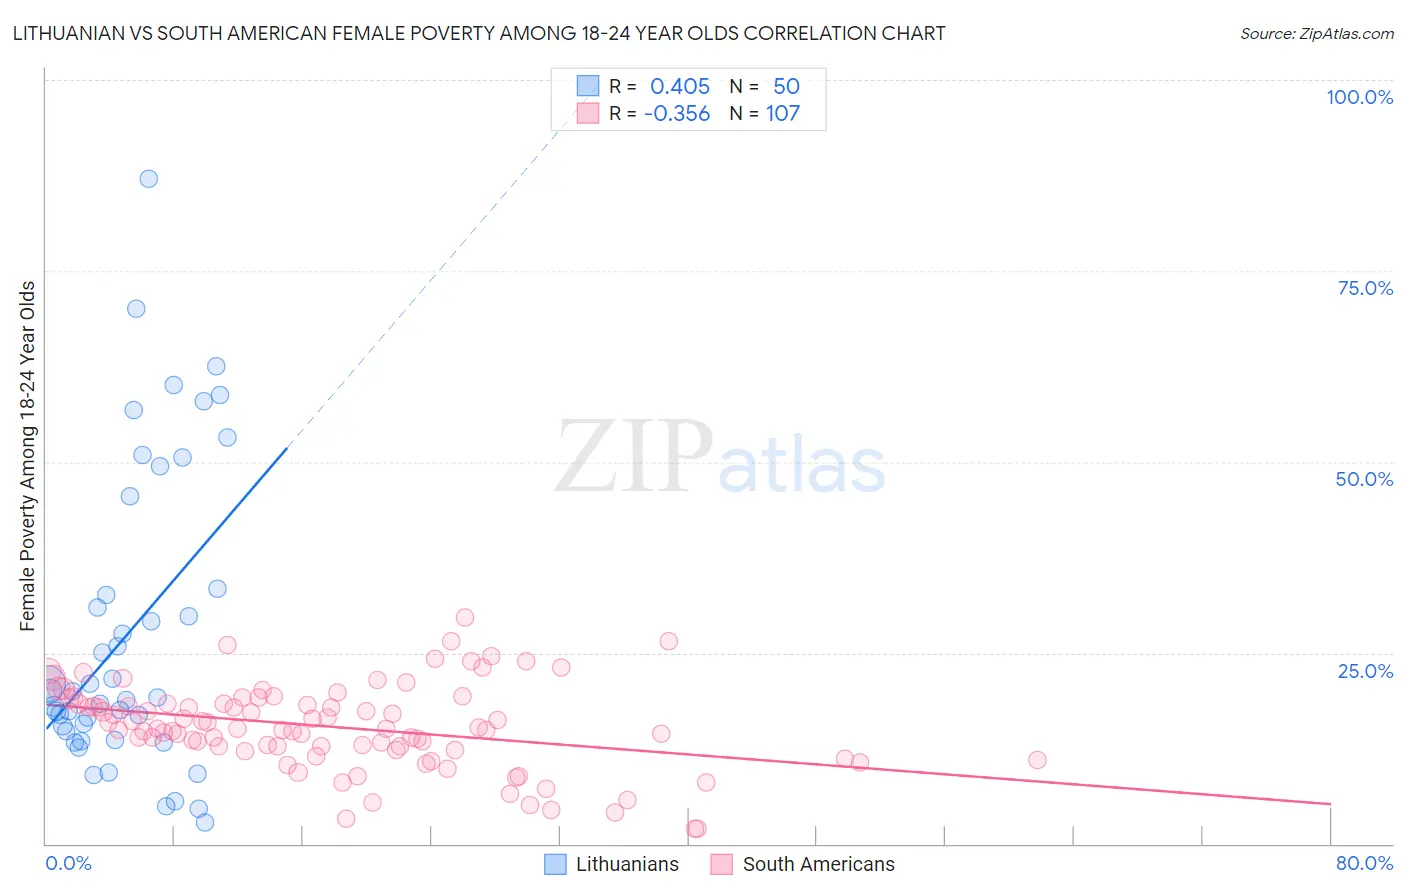 Lithuanian vs South American Female Poverty Among 18-24 Year Olds